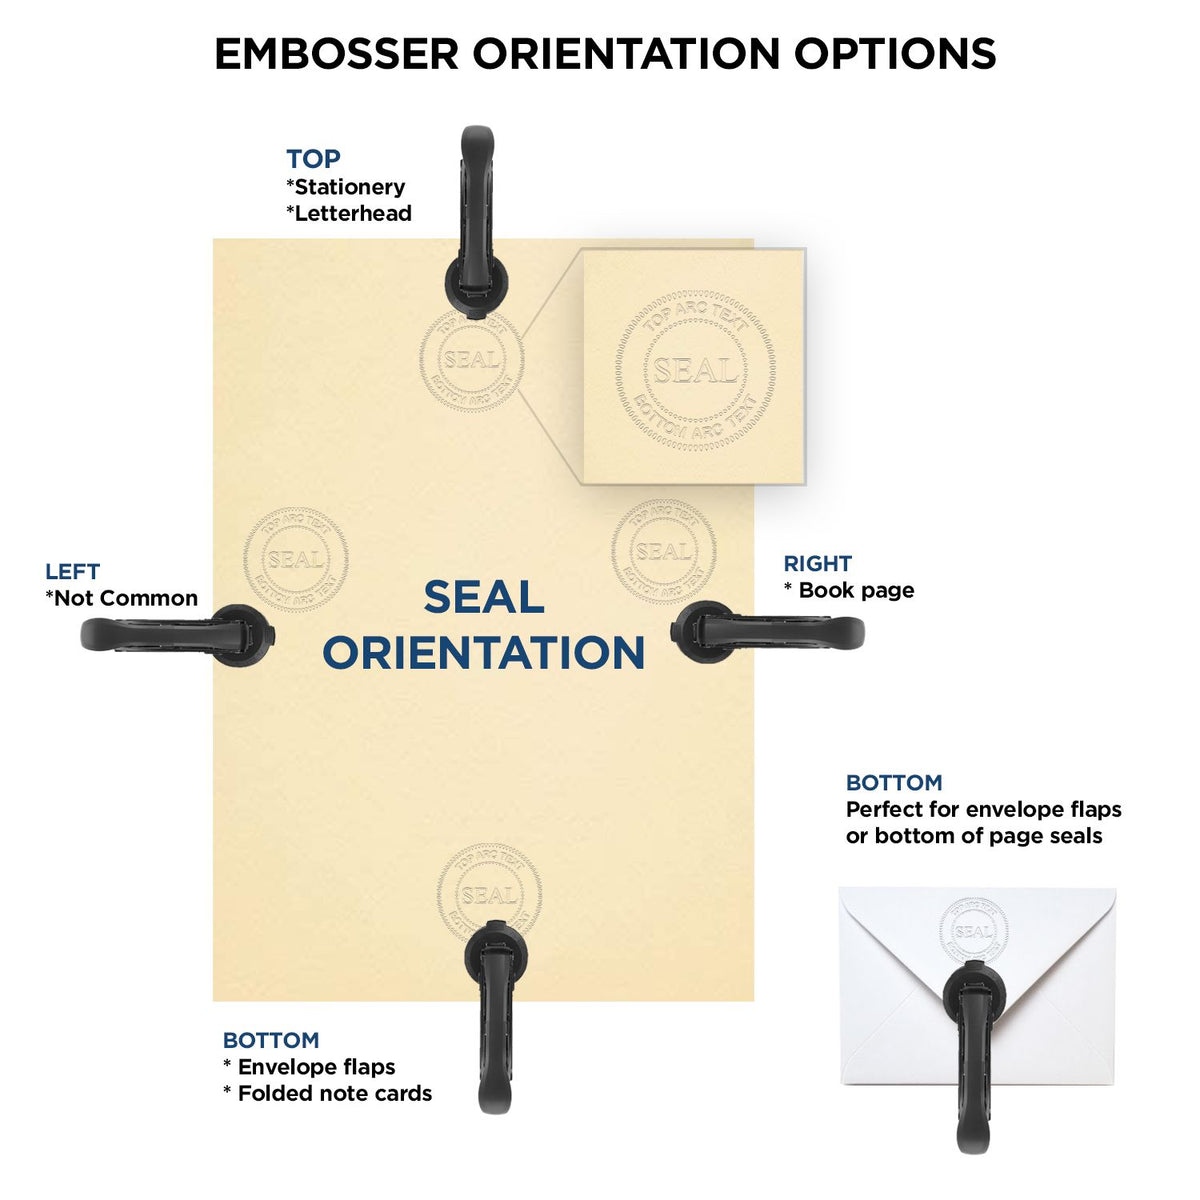 An infographic for the State of Texas Architectural Seal Embosser showing embosser orientation, this is showing examples of a top, bottom, right and left insert.